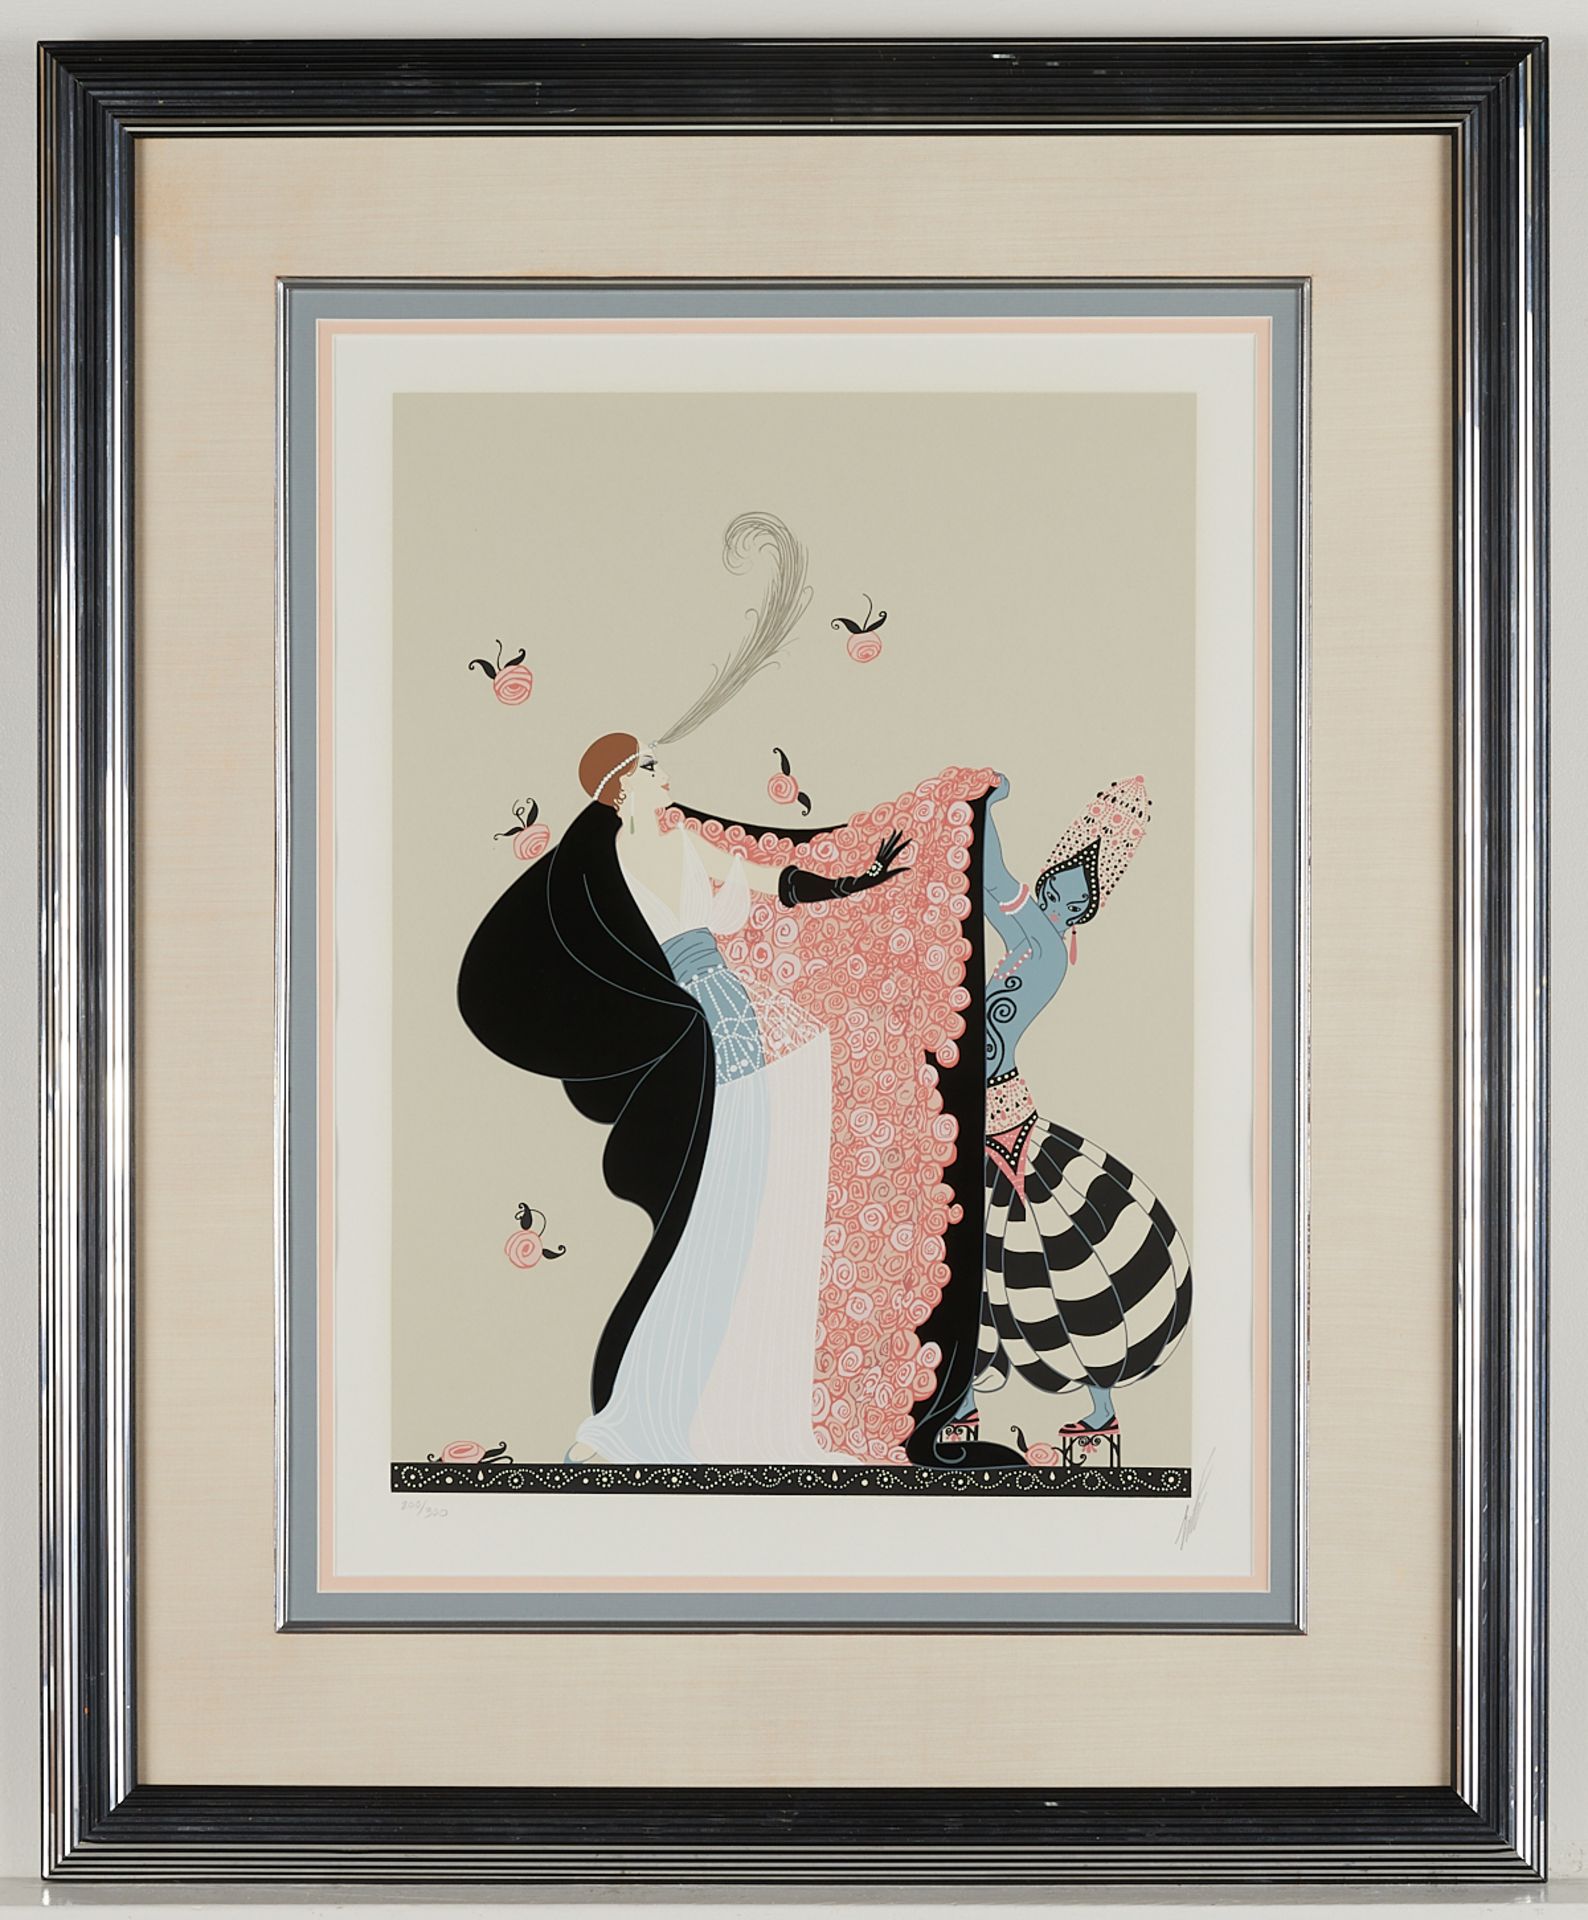 Erte "The Flowered Cape" Serigraph 1981 - Image 3 of 9